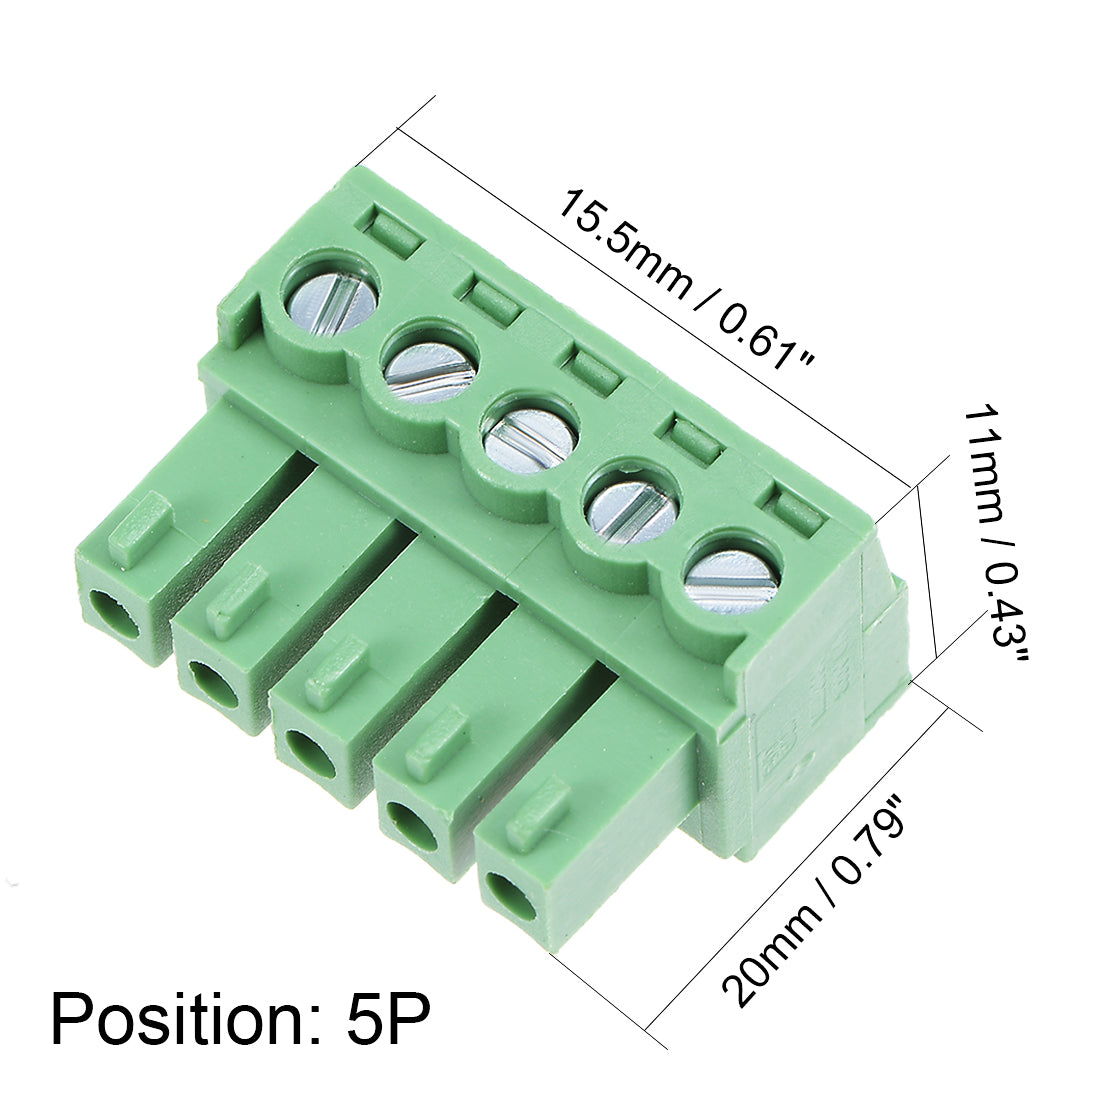 uxcell Uxcell 6Pcs AC300V 8A 3.81mm Pitch 5P Needle Seat Insert-In PCB Terminal Block green